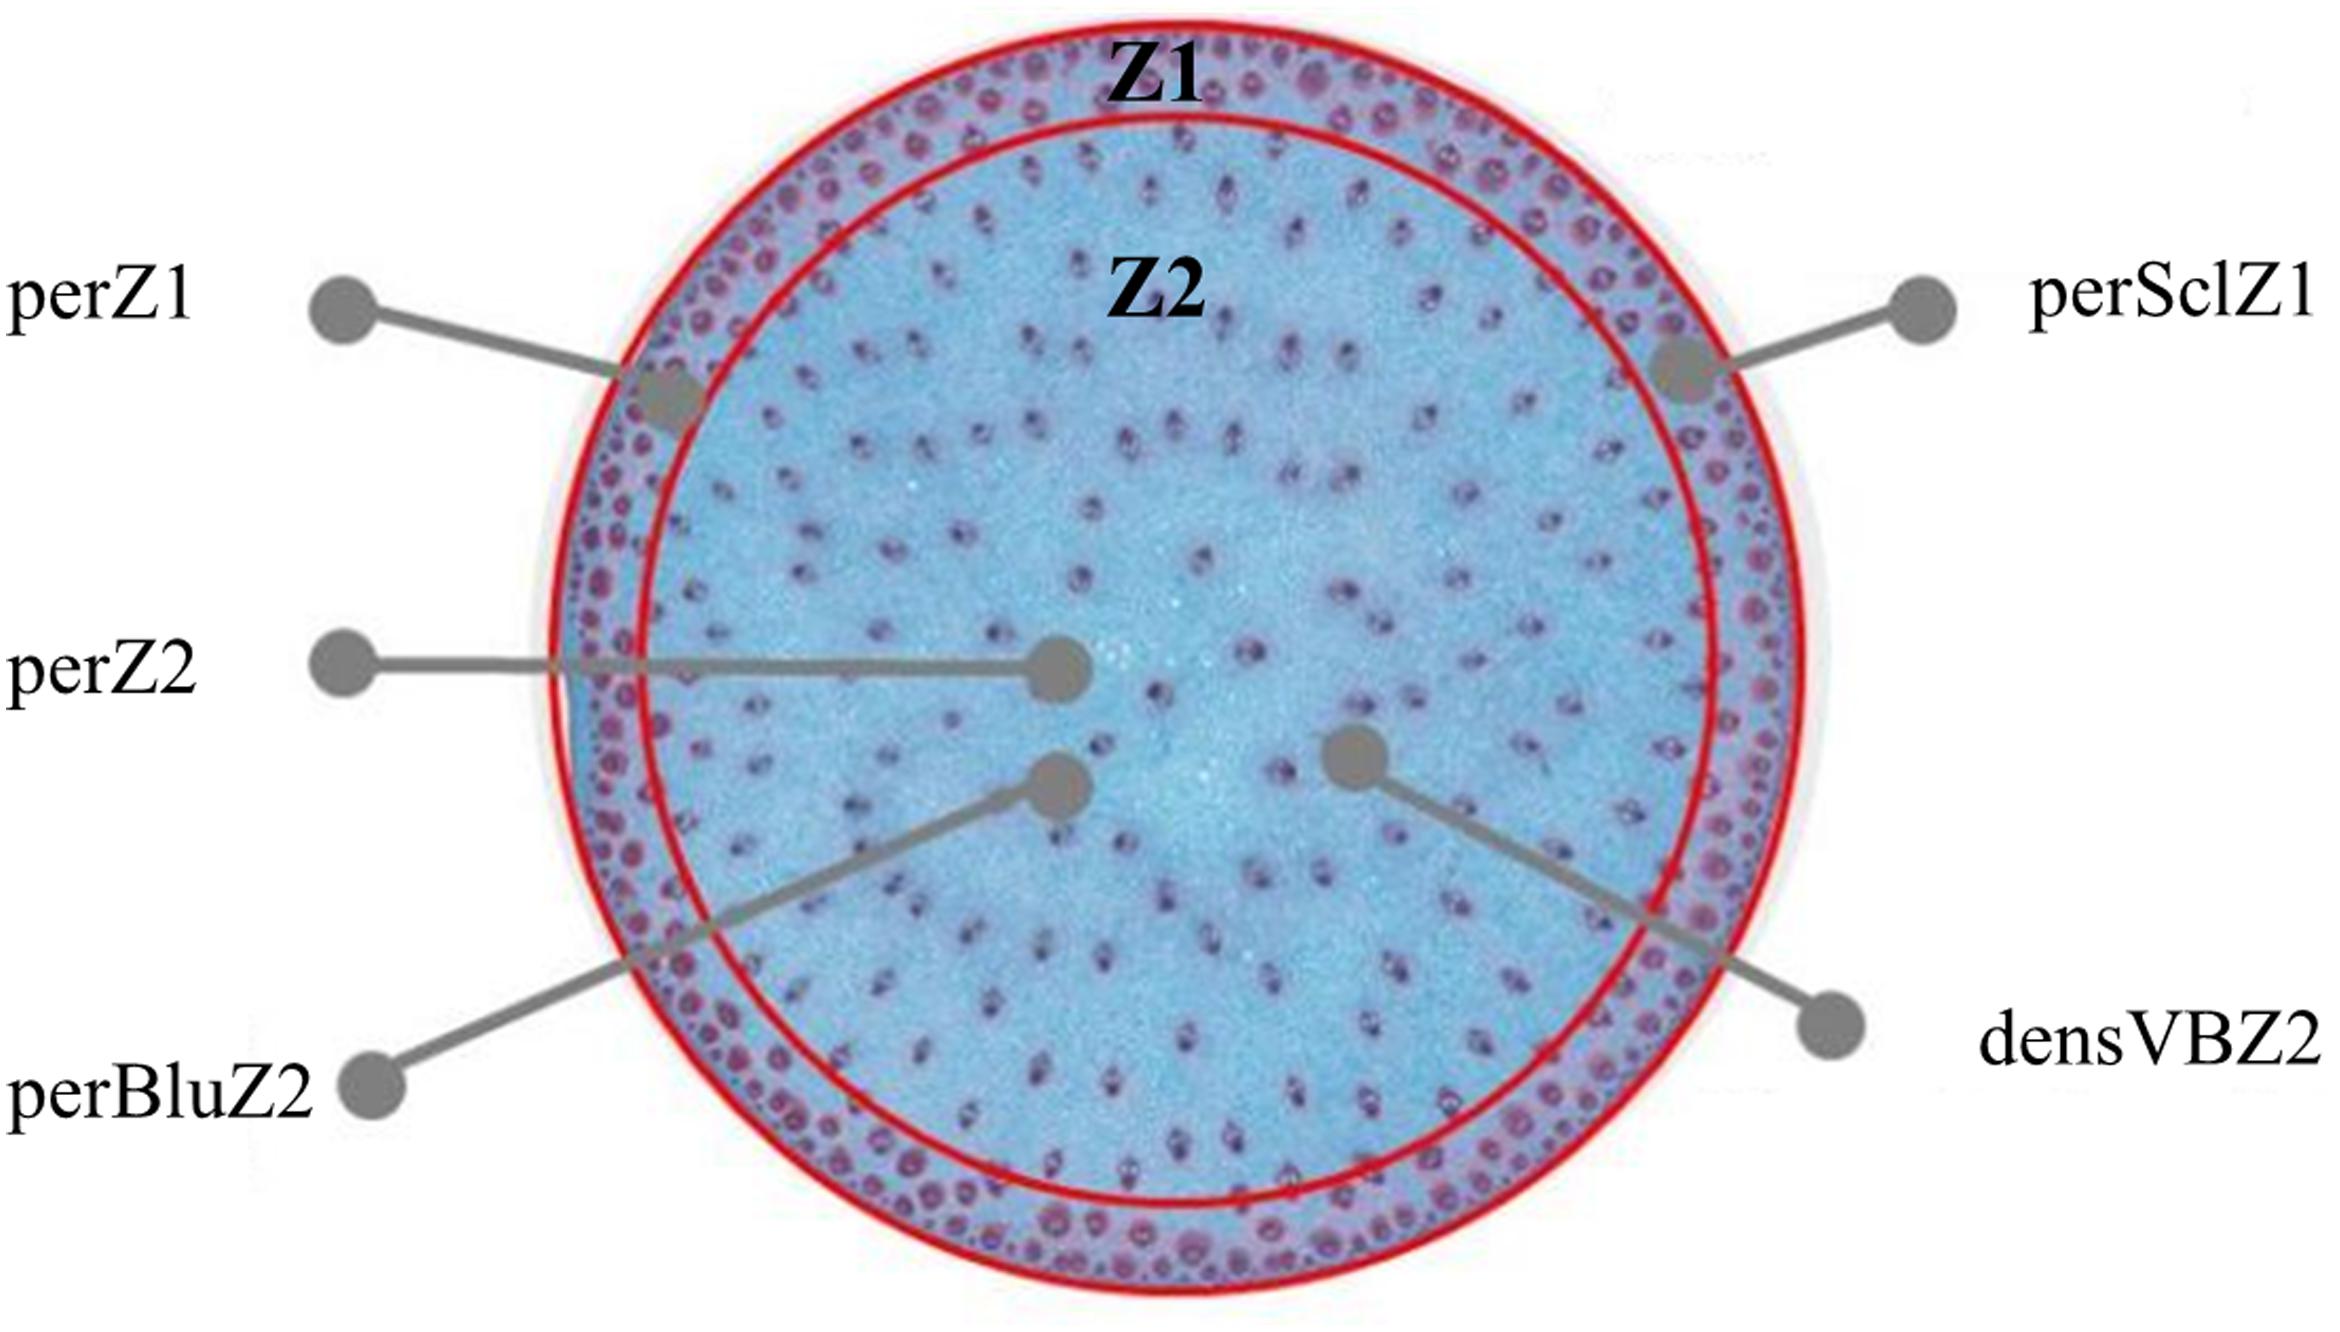 Photograph of a stained cross section of a sorghum stem. The photograph shows a circular stem that has been stained blue. Darker vascular bundles are scattered throughout the stem. They are most dense near the periphery and less dense in the interior.